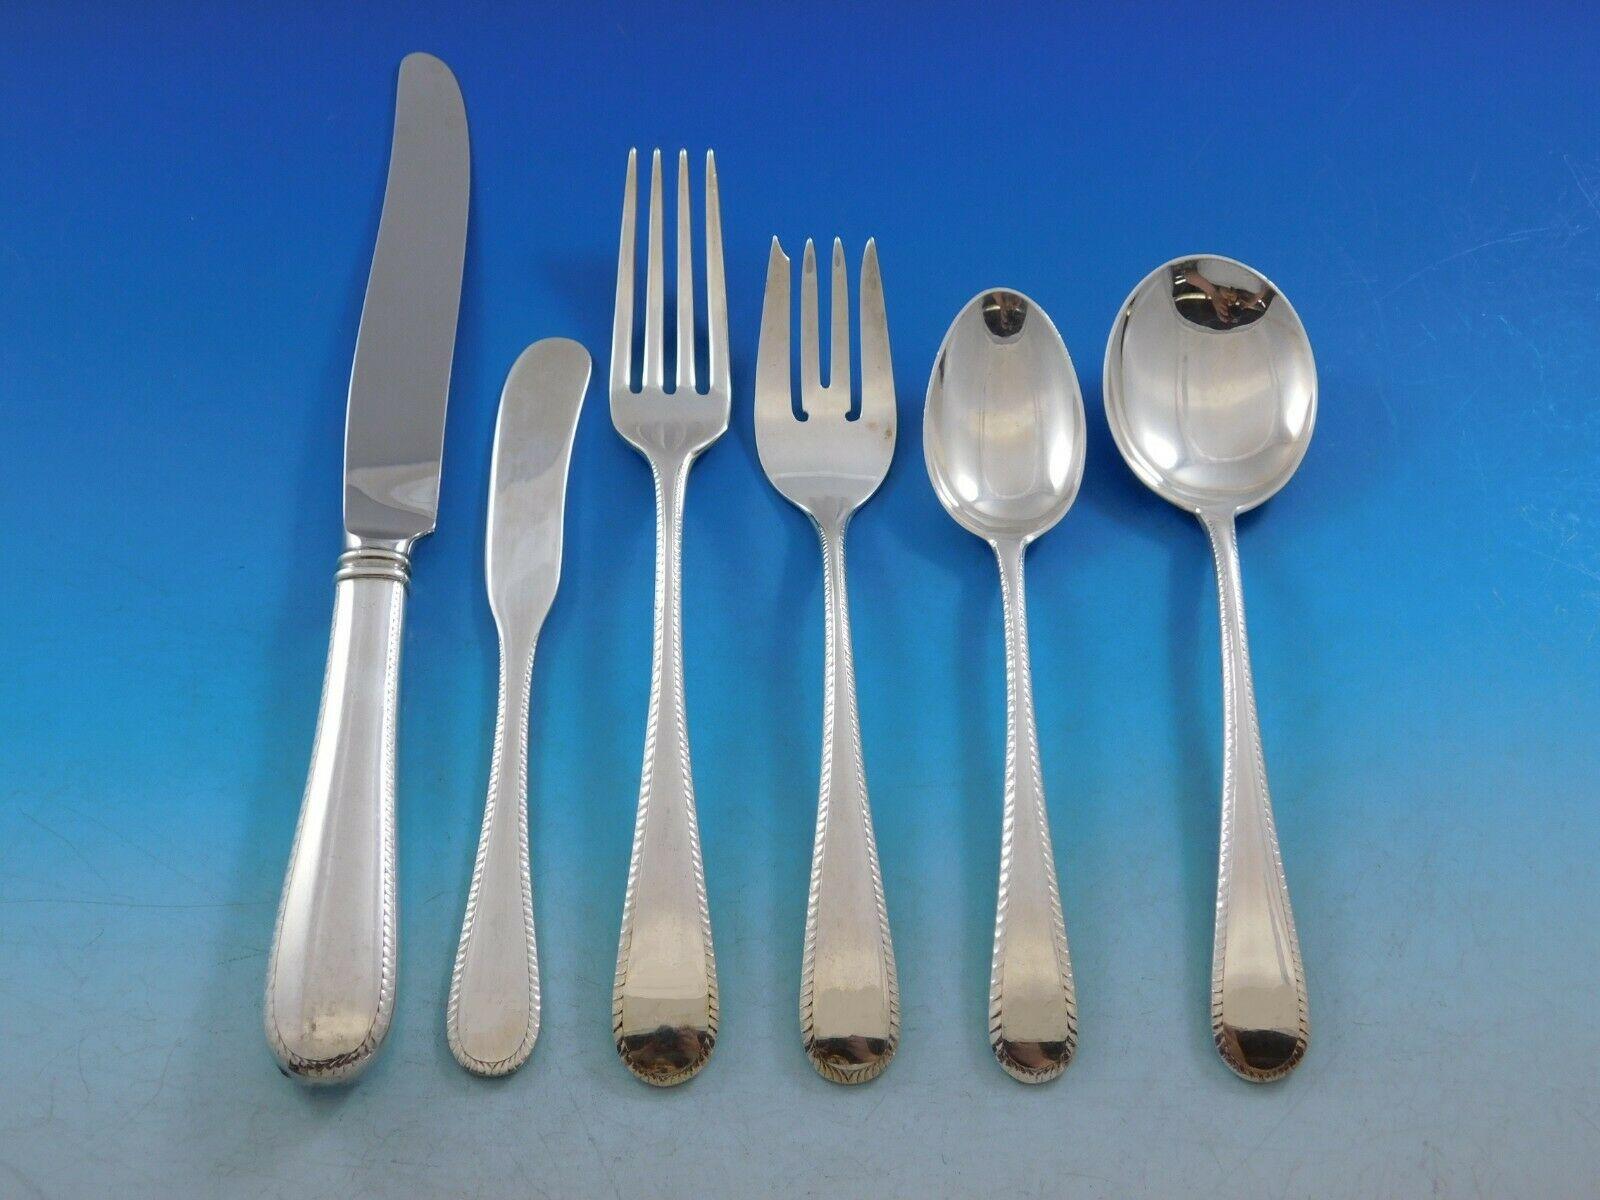 French Colonial Engraved by Blackinton sterling silver flatware set, 48 pieces. This set includes:

8 knives, 9